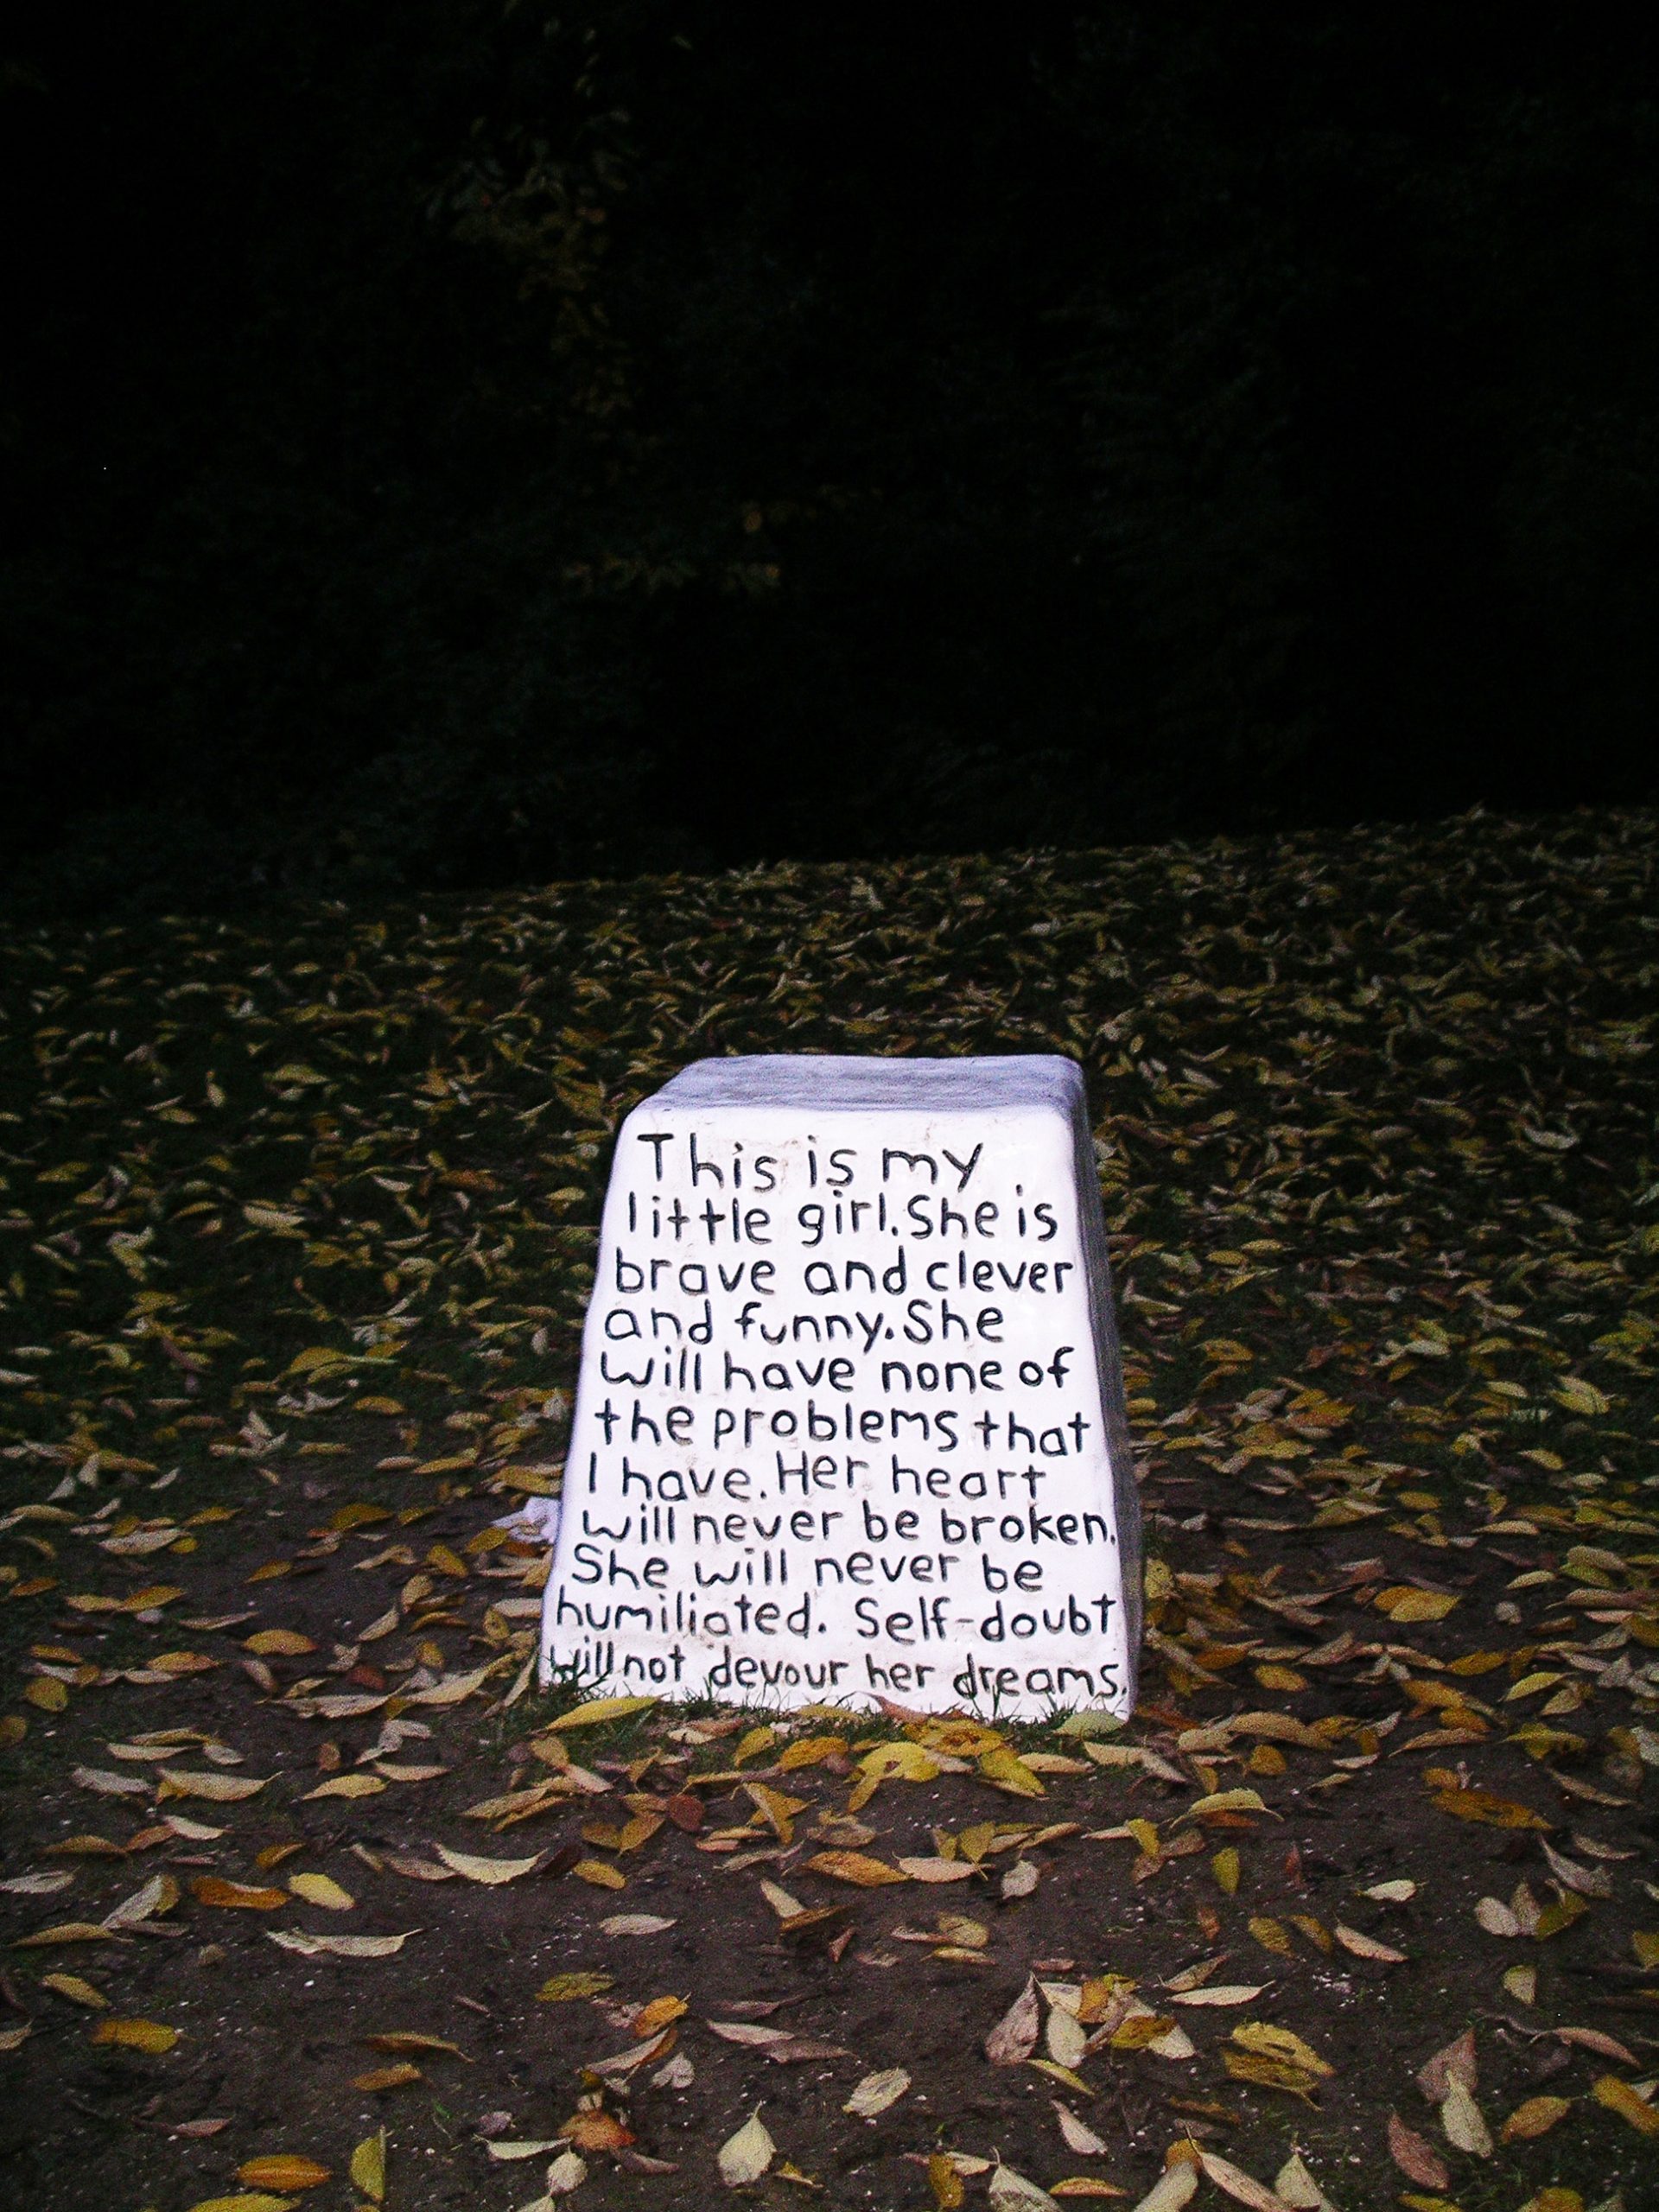 An empty pedestal in a landscape of leaves with words inscribed.